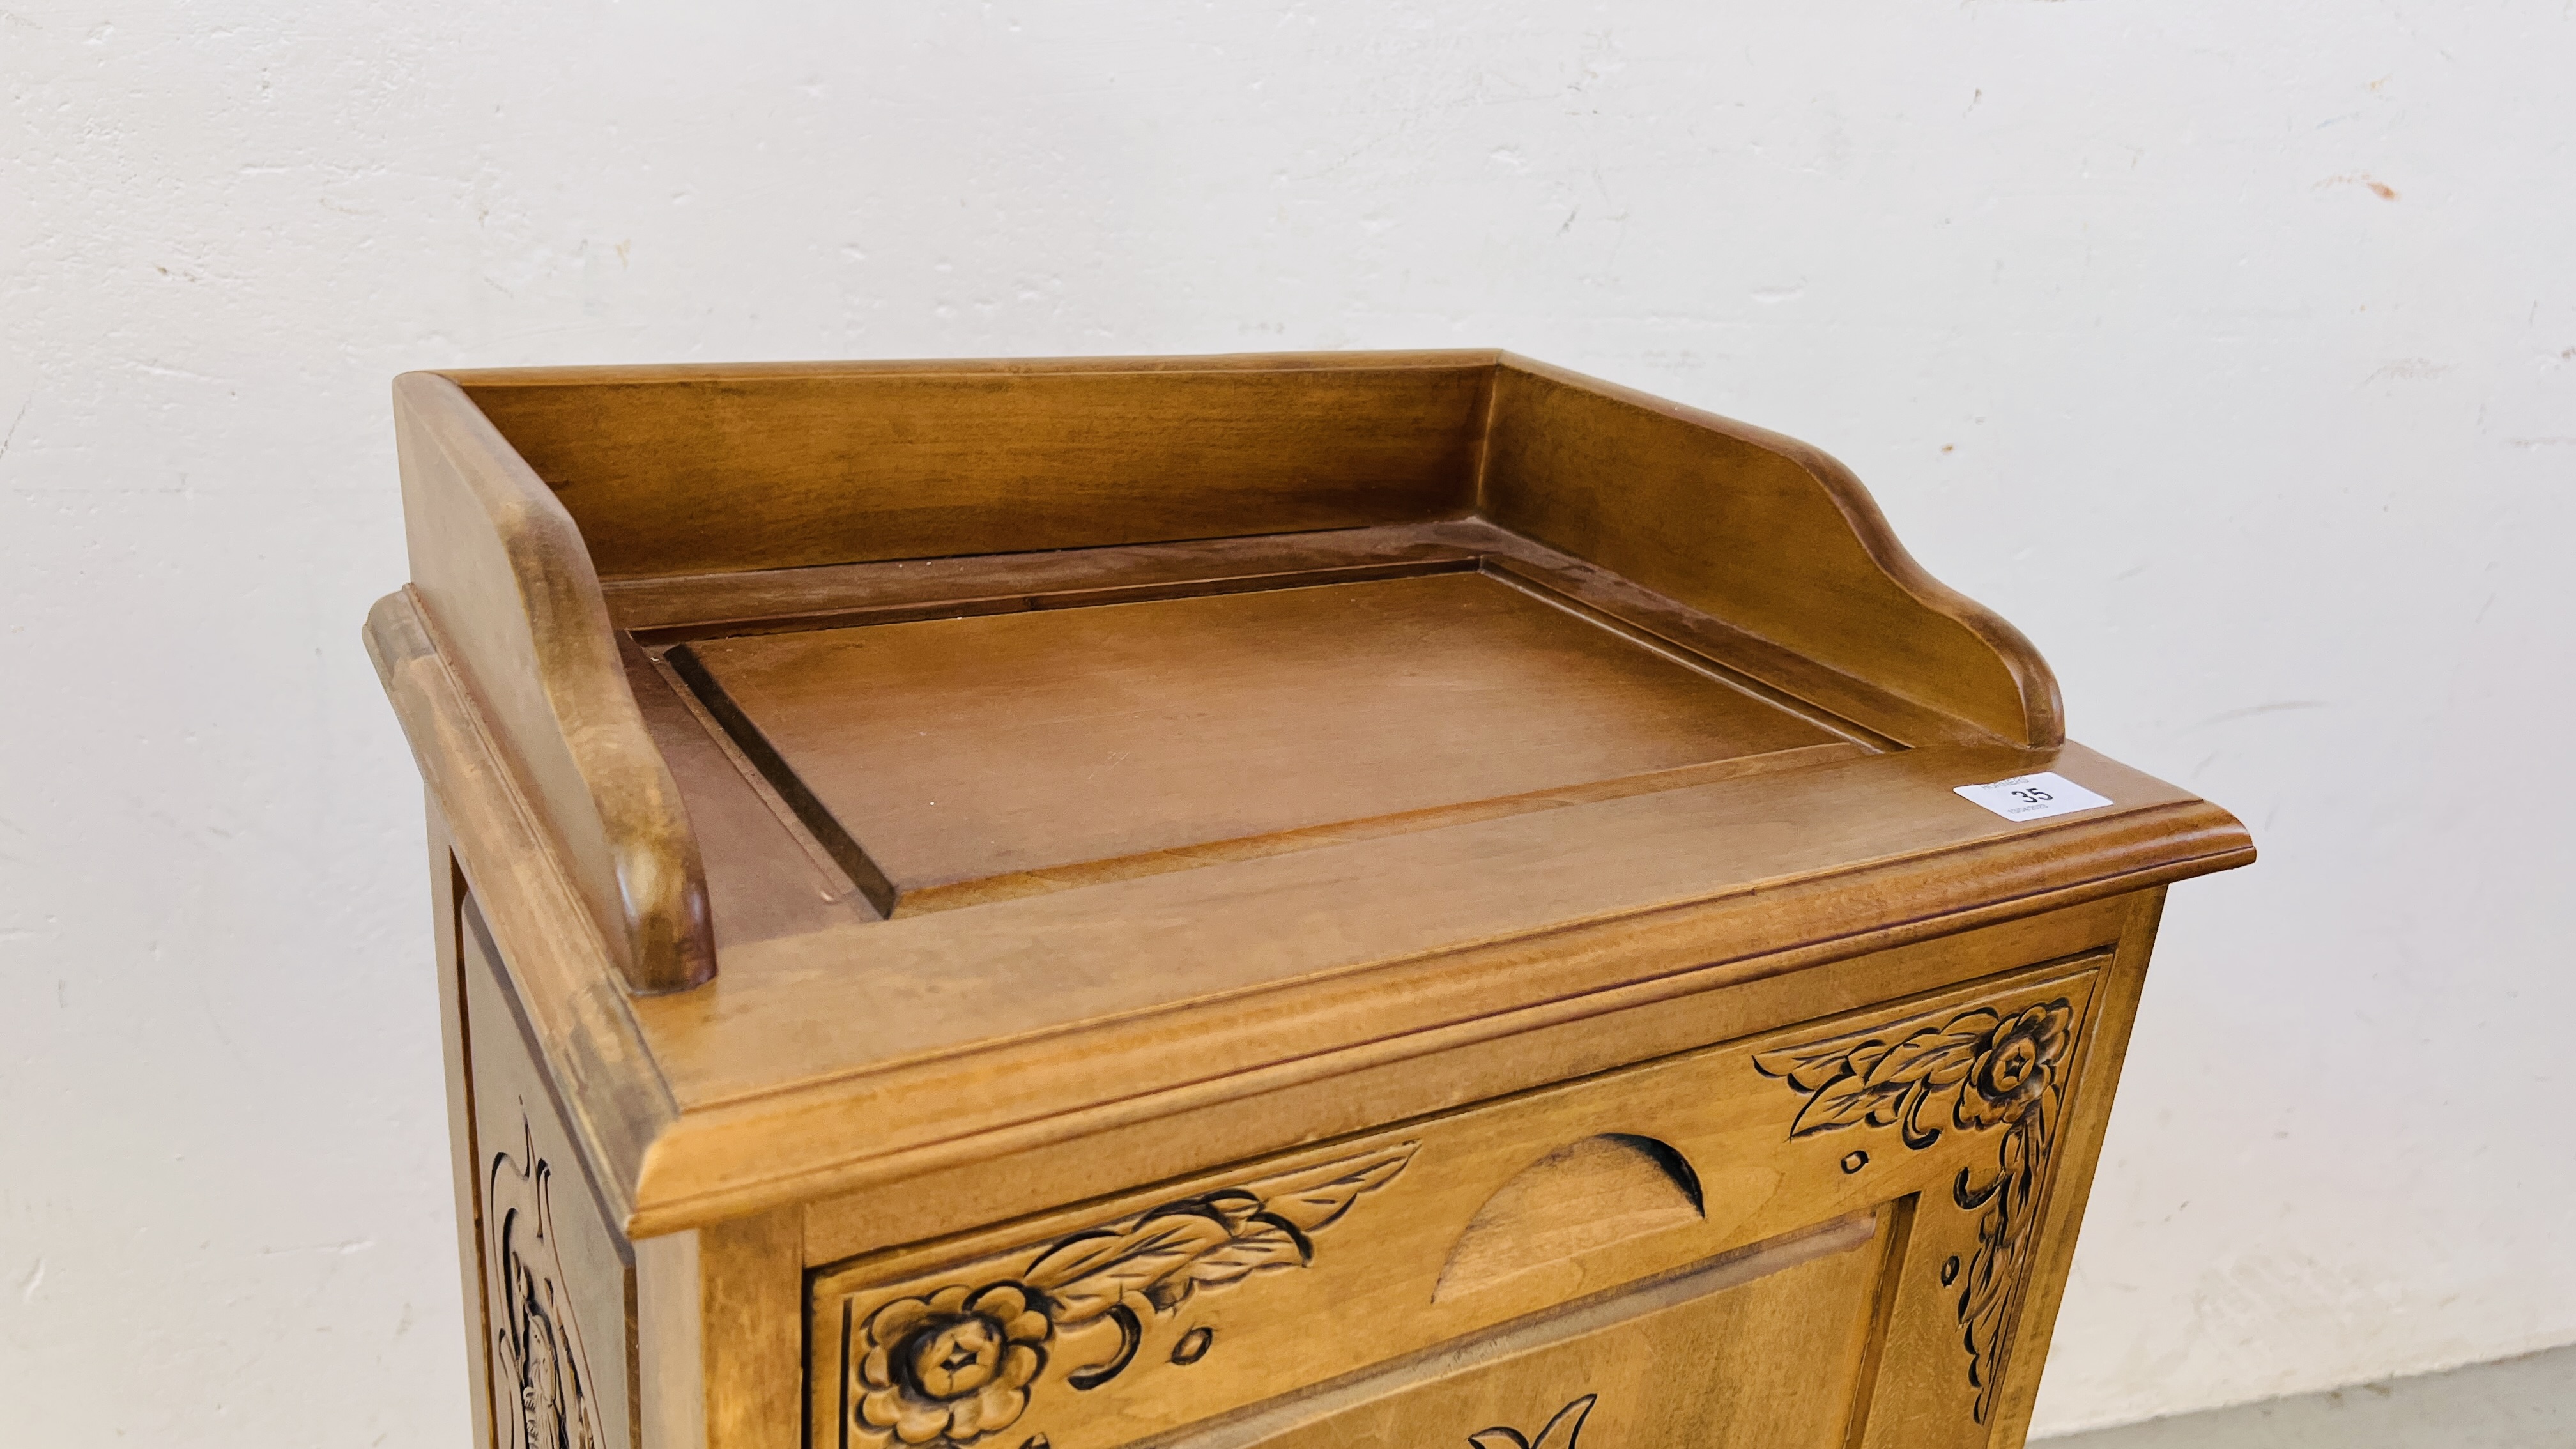 A HARDWOOD LINEN TIDY WITH CARVED DETAIL TO THE FRONT - W 43CM X D 33CM X H 80CM. - Image 2 of 7